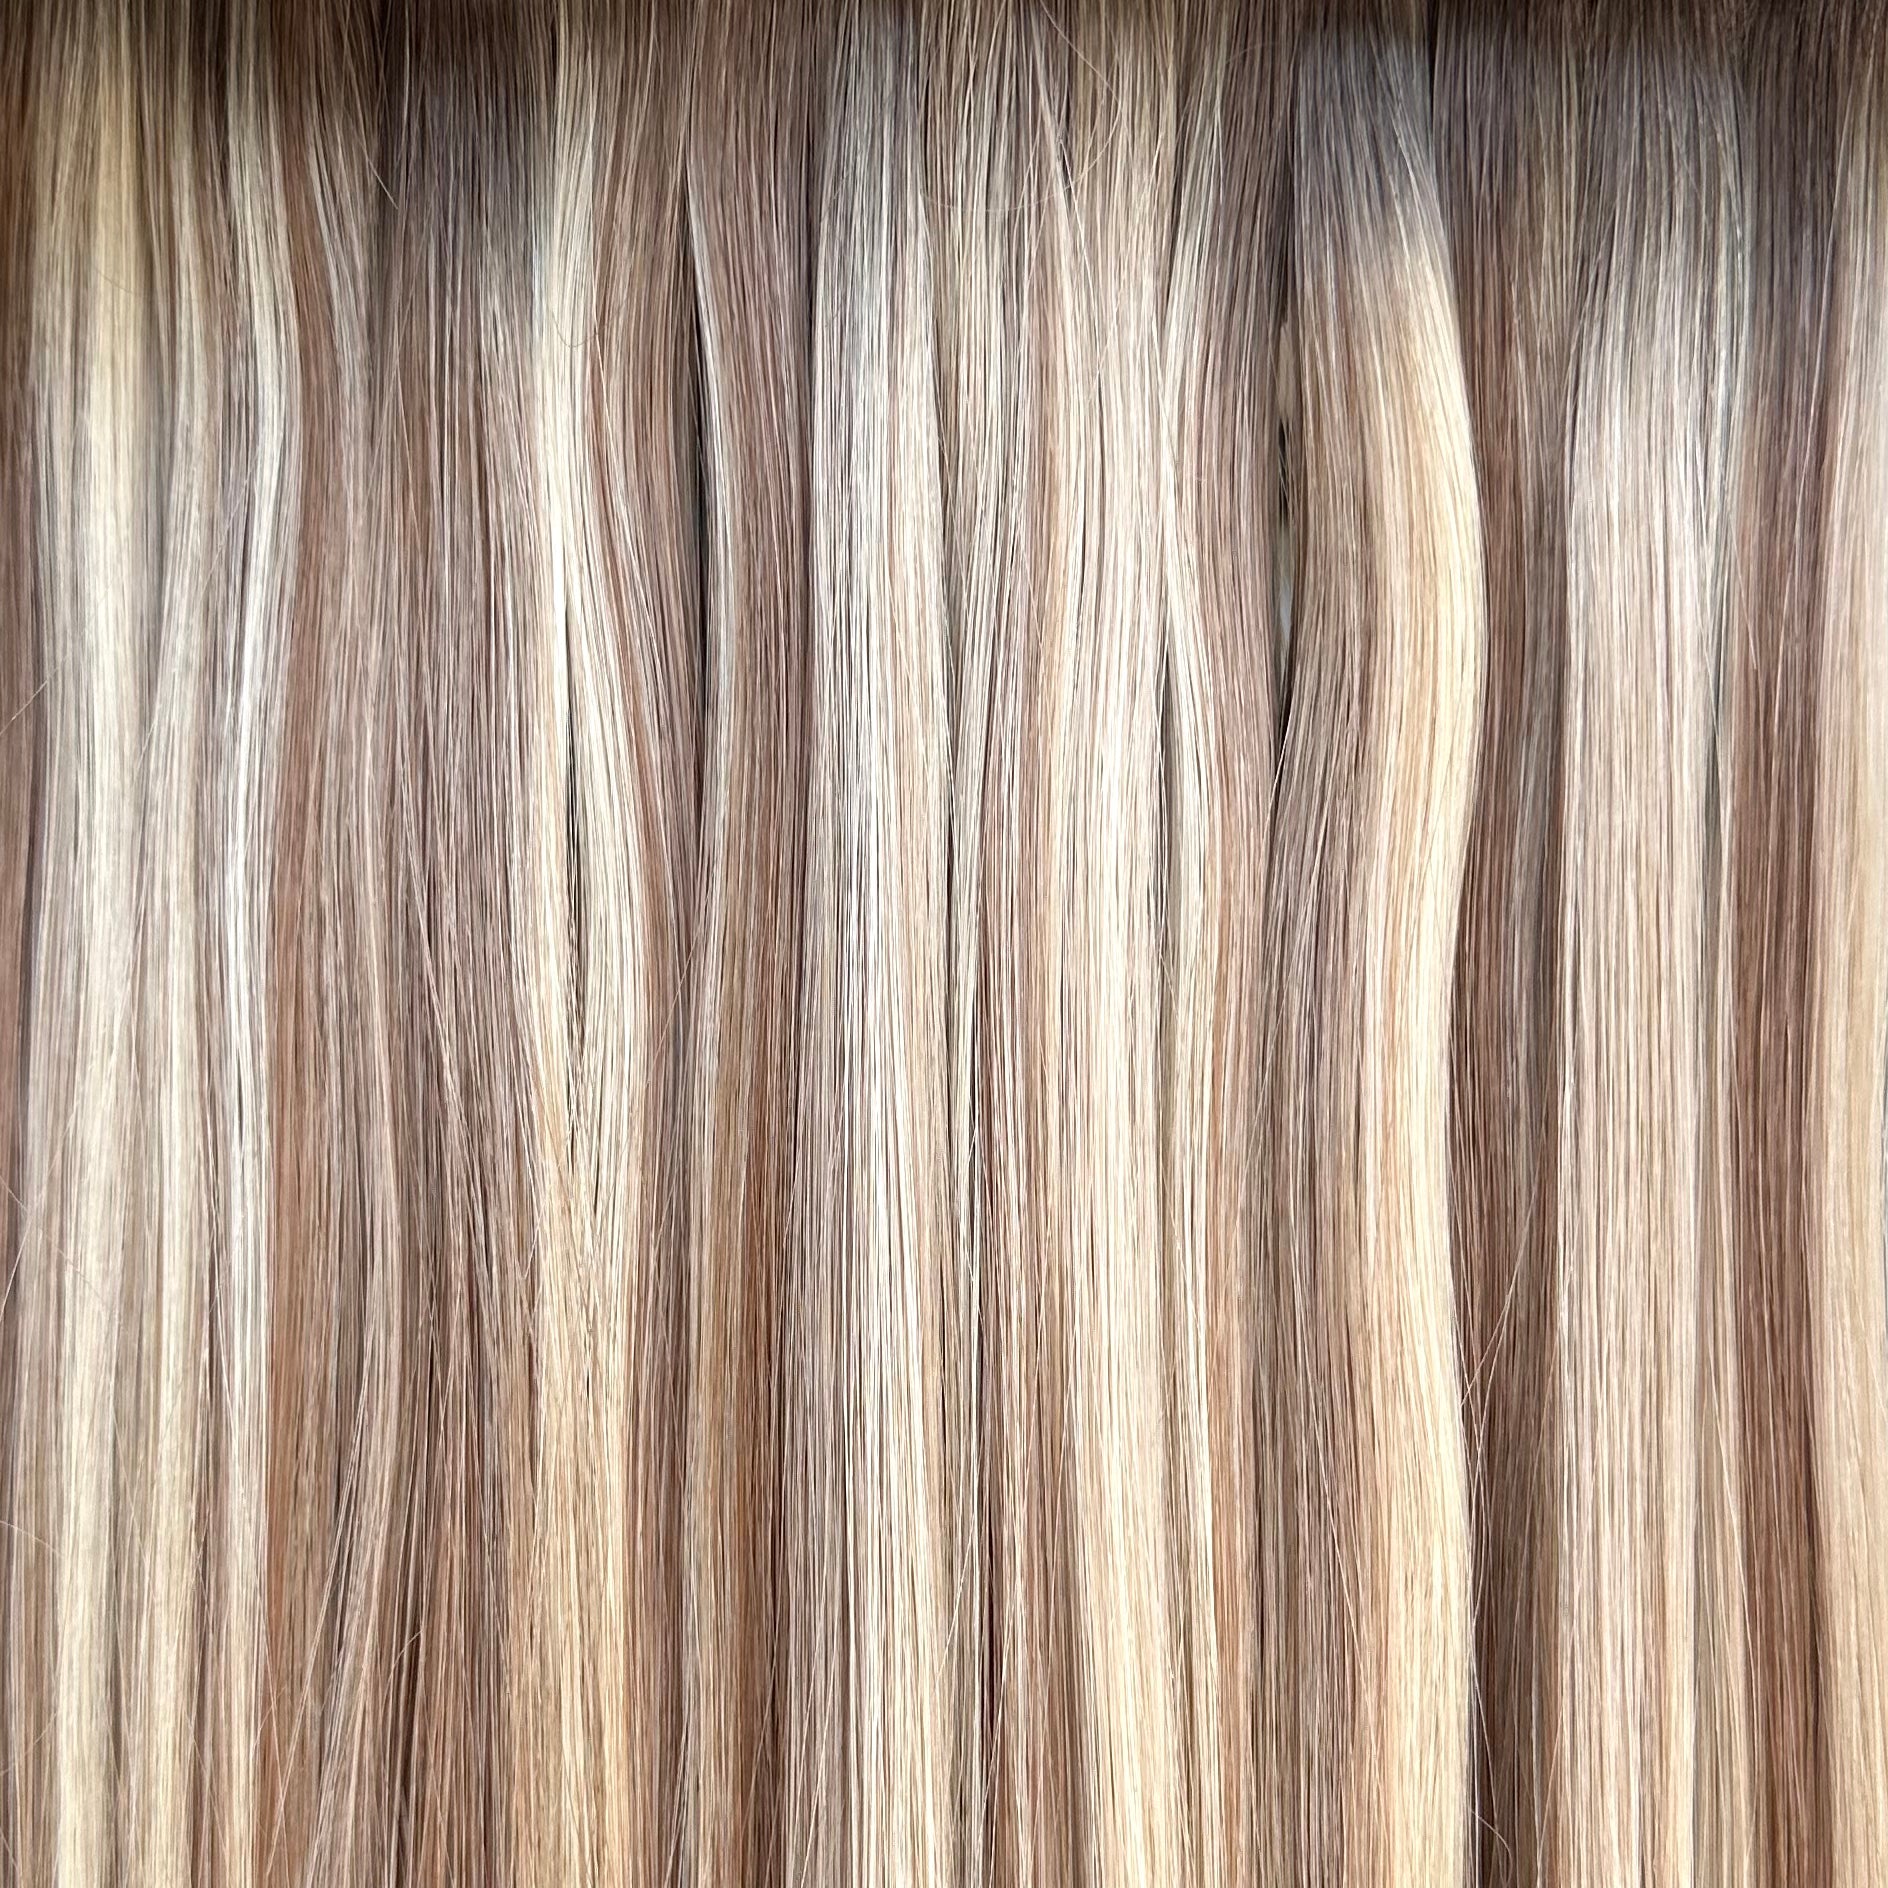 Rooted Coconut Blonde Piano - Luxe Hand Tied Weft